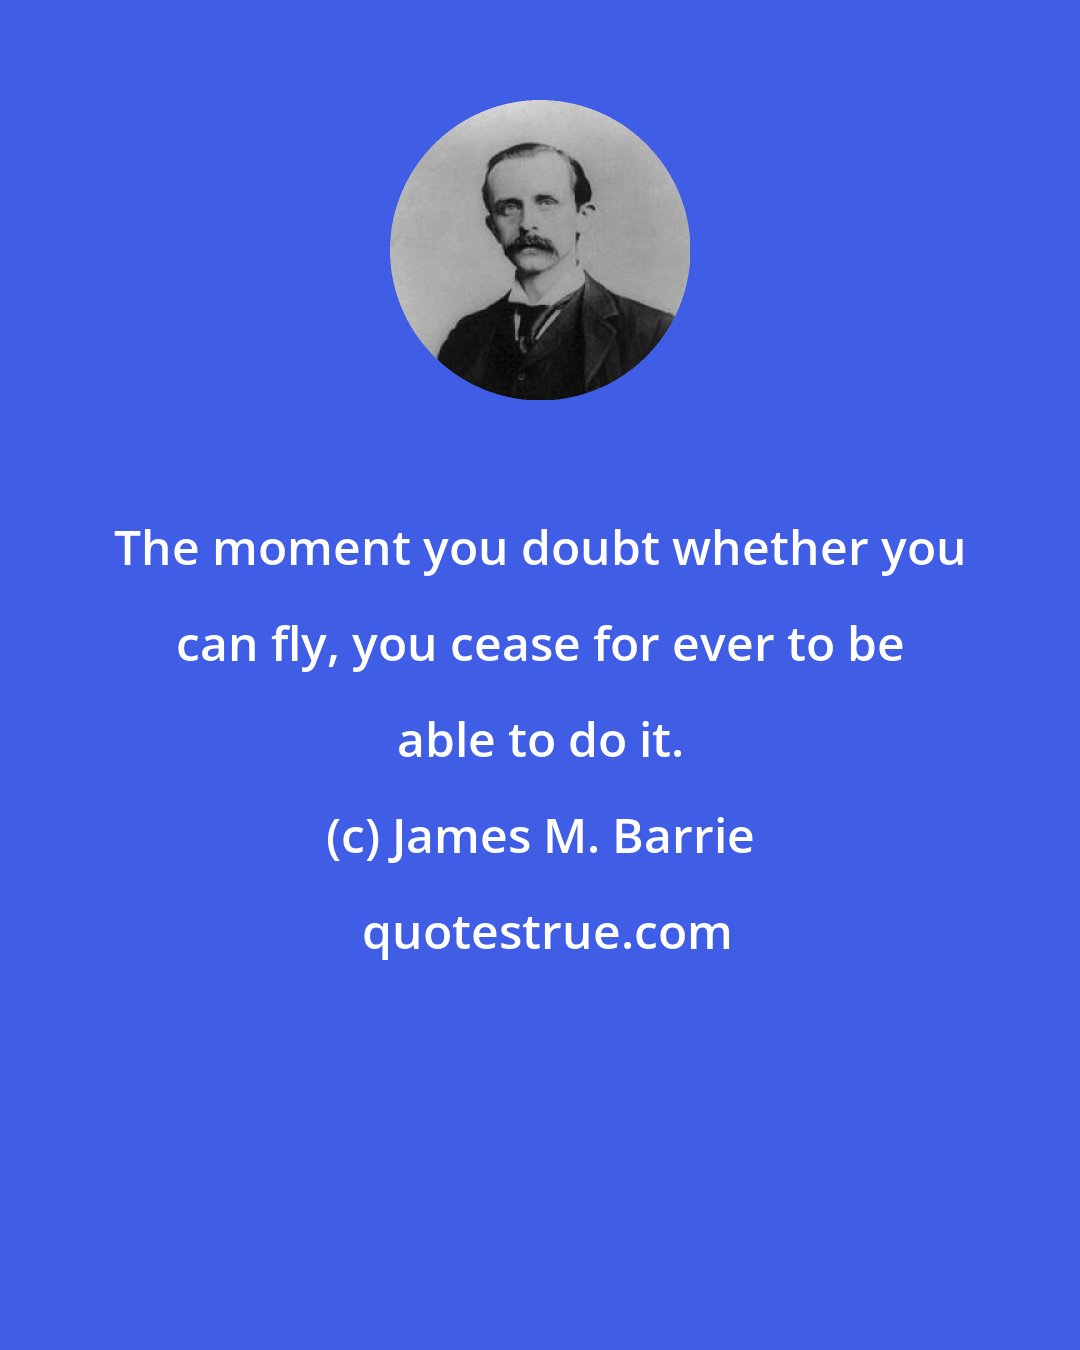 James M. Barrie: The moment you doubt whether you can fly, you cease for ever to be able to do it.